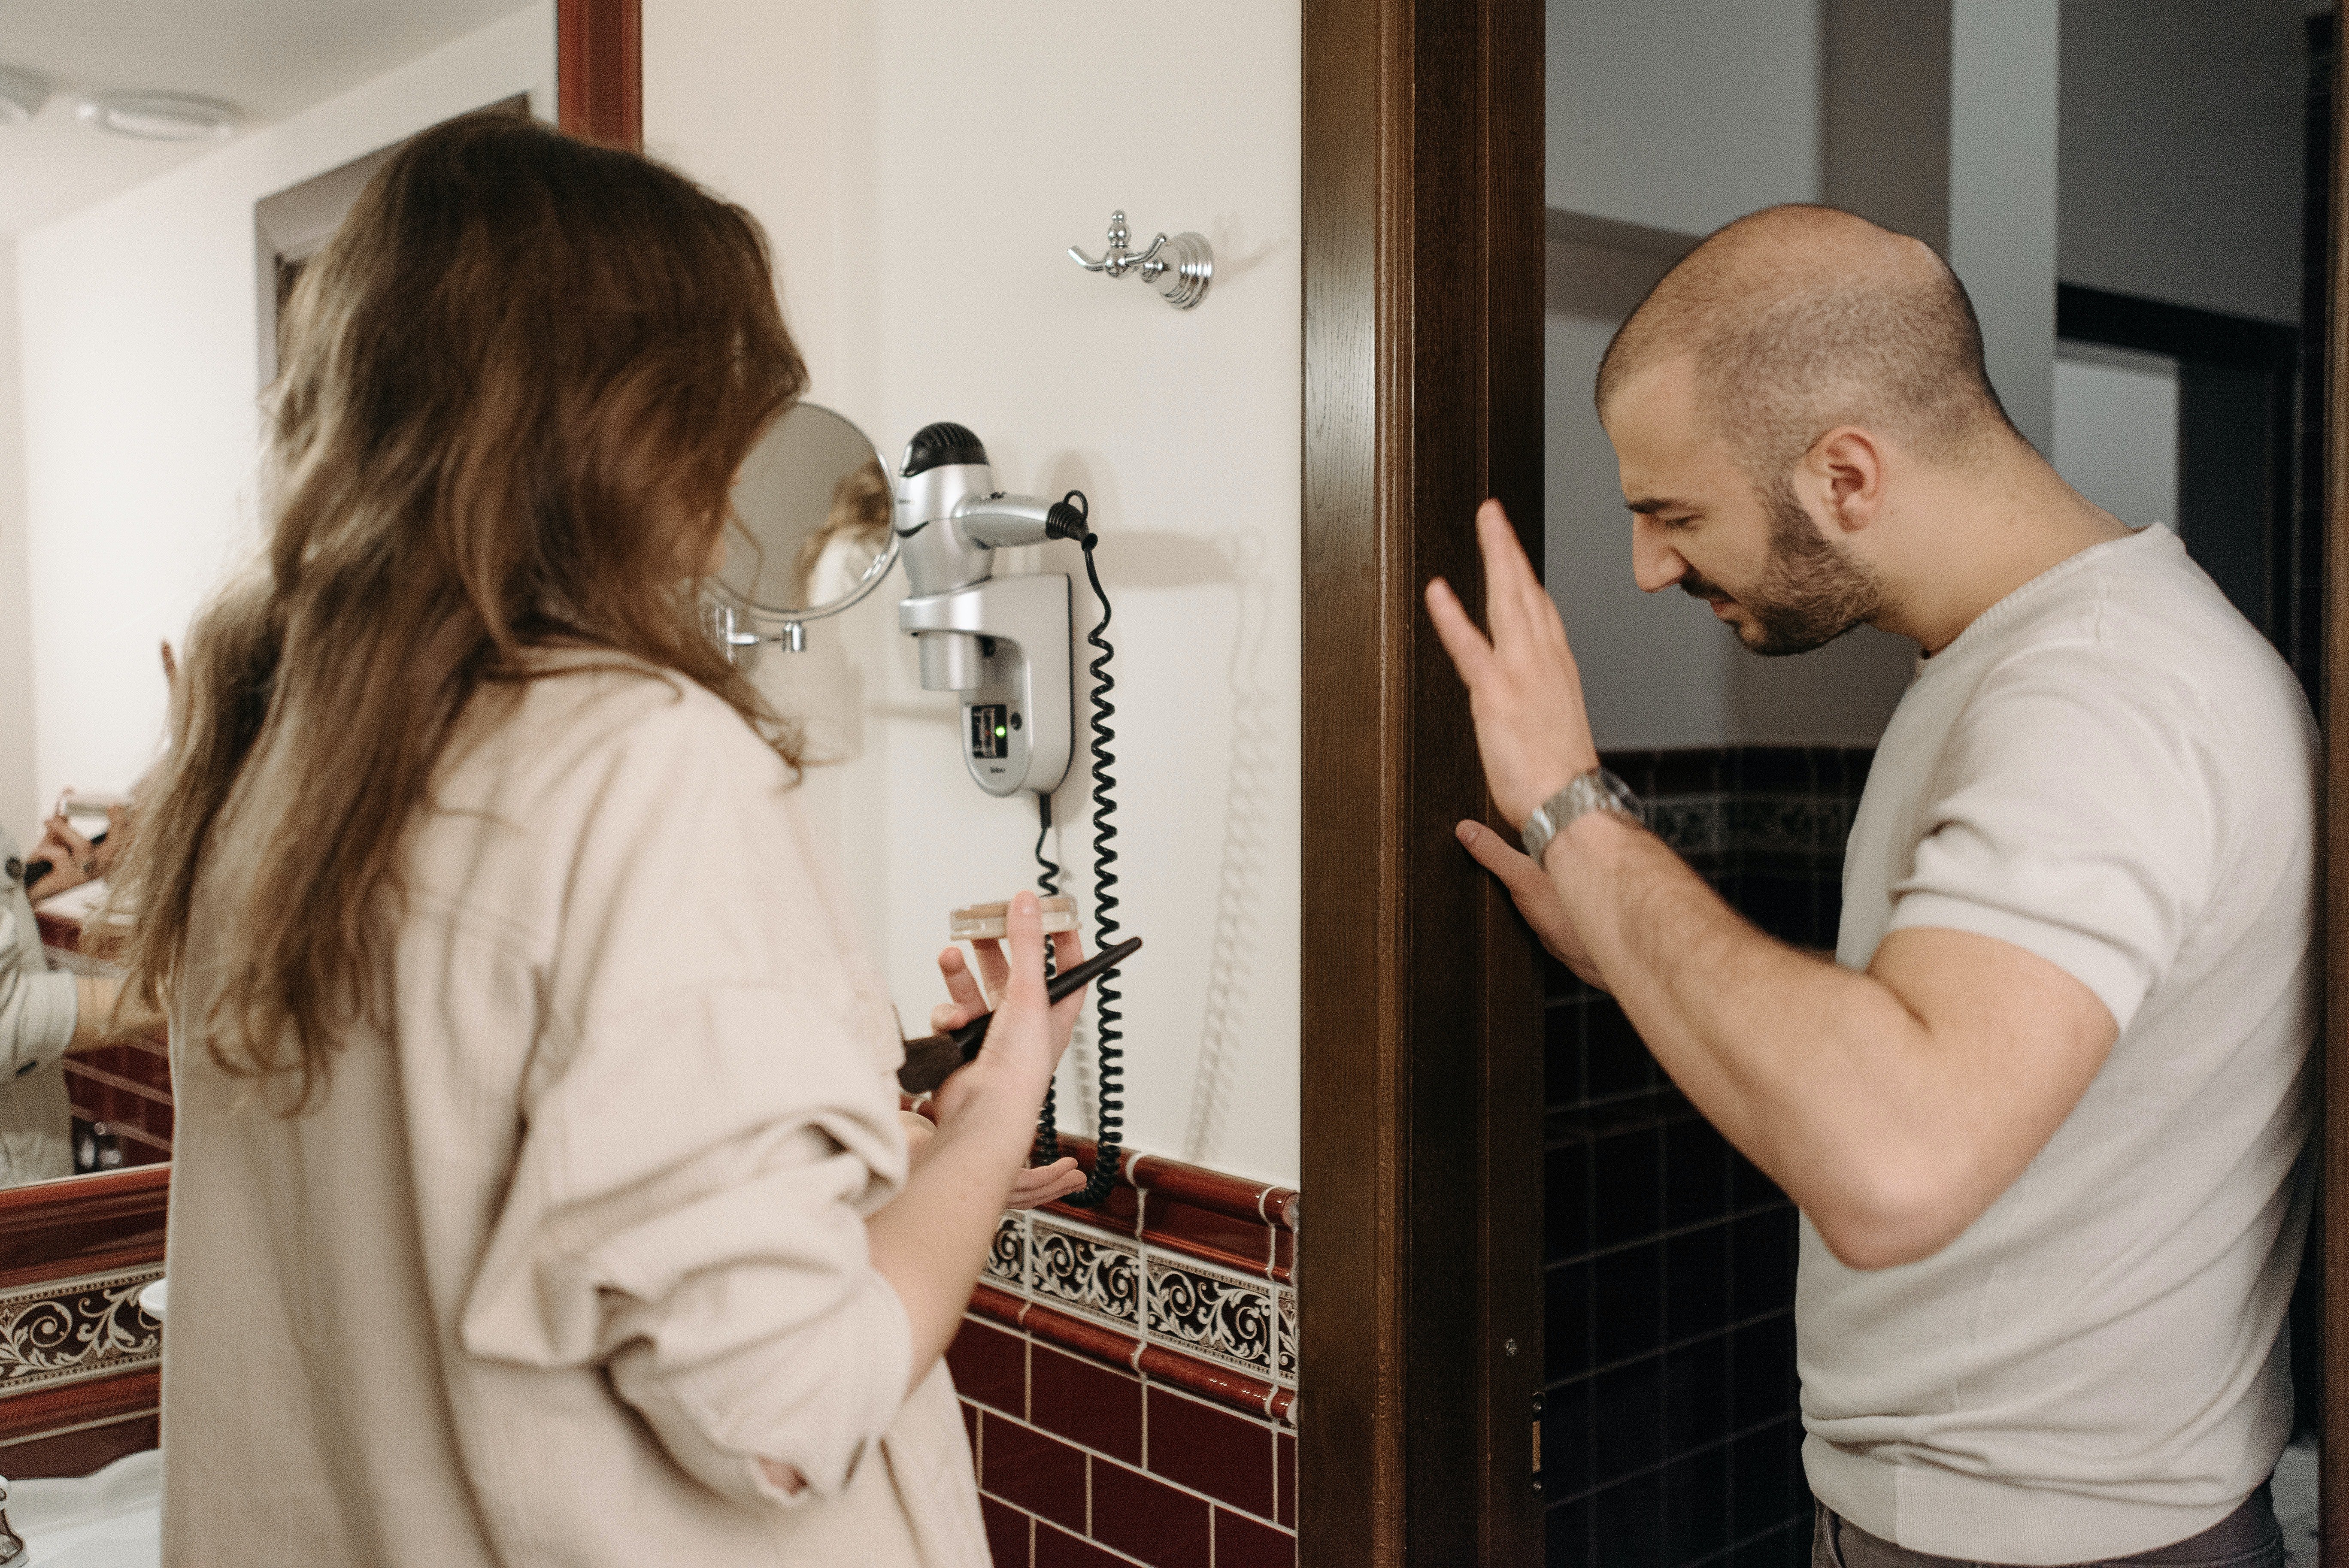 The husband was furious with his wife & confronted her. | Source: Pexels